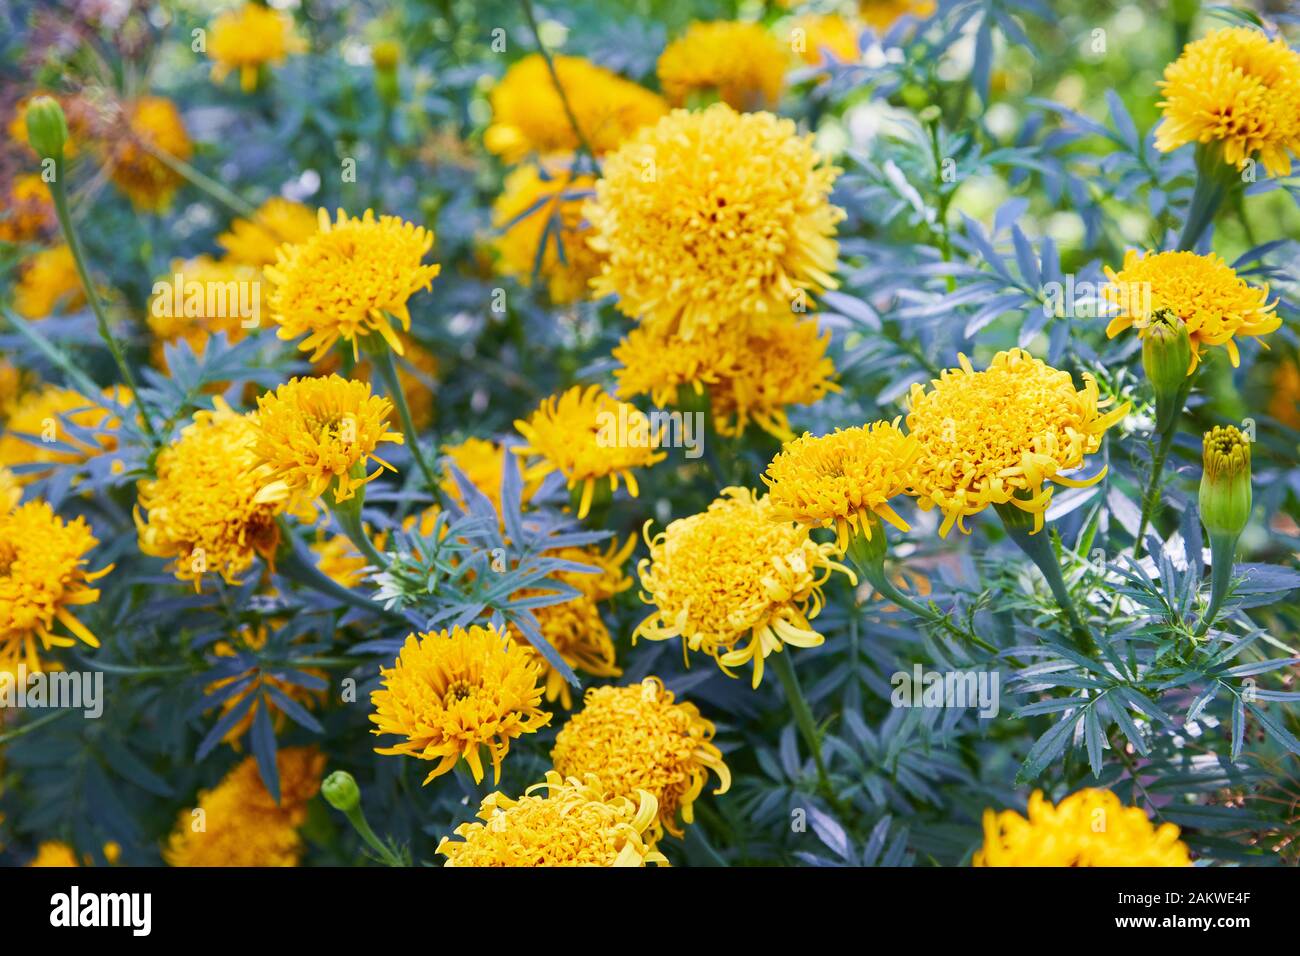 Tagetes erecta, commonly called tagete, a species of the Asteraceae family. Marigold flower (Mexican, Aztec or African marigold) in the garden. Stock Photo